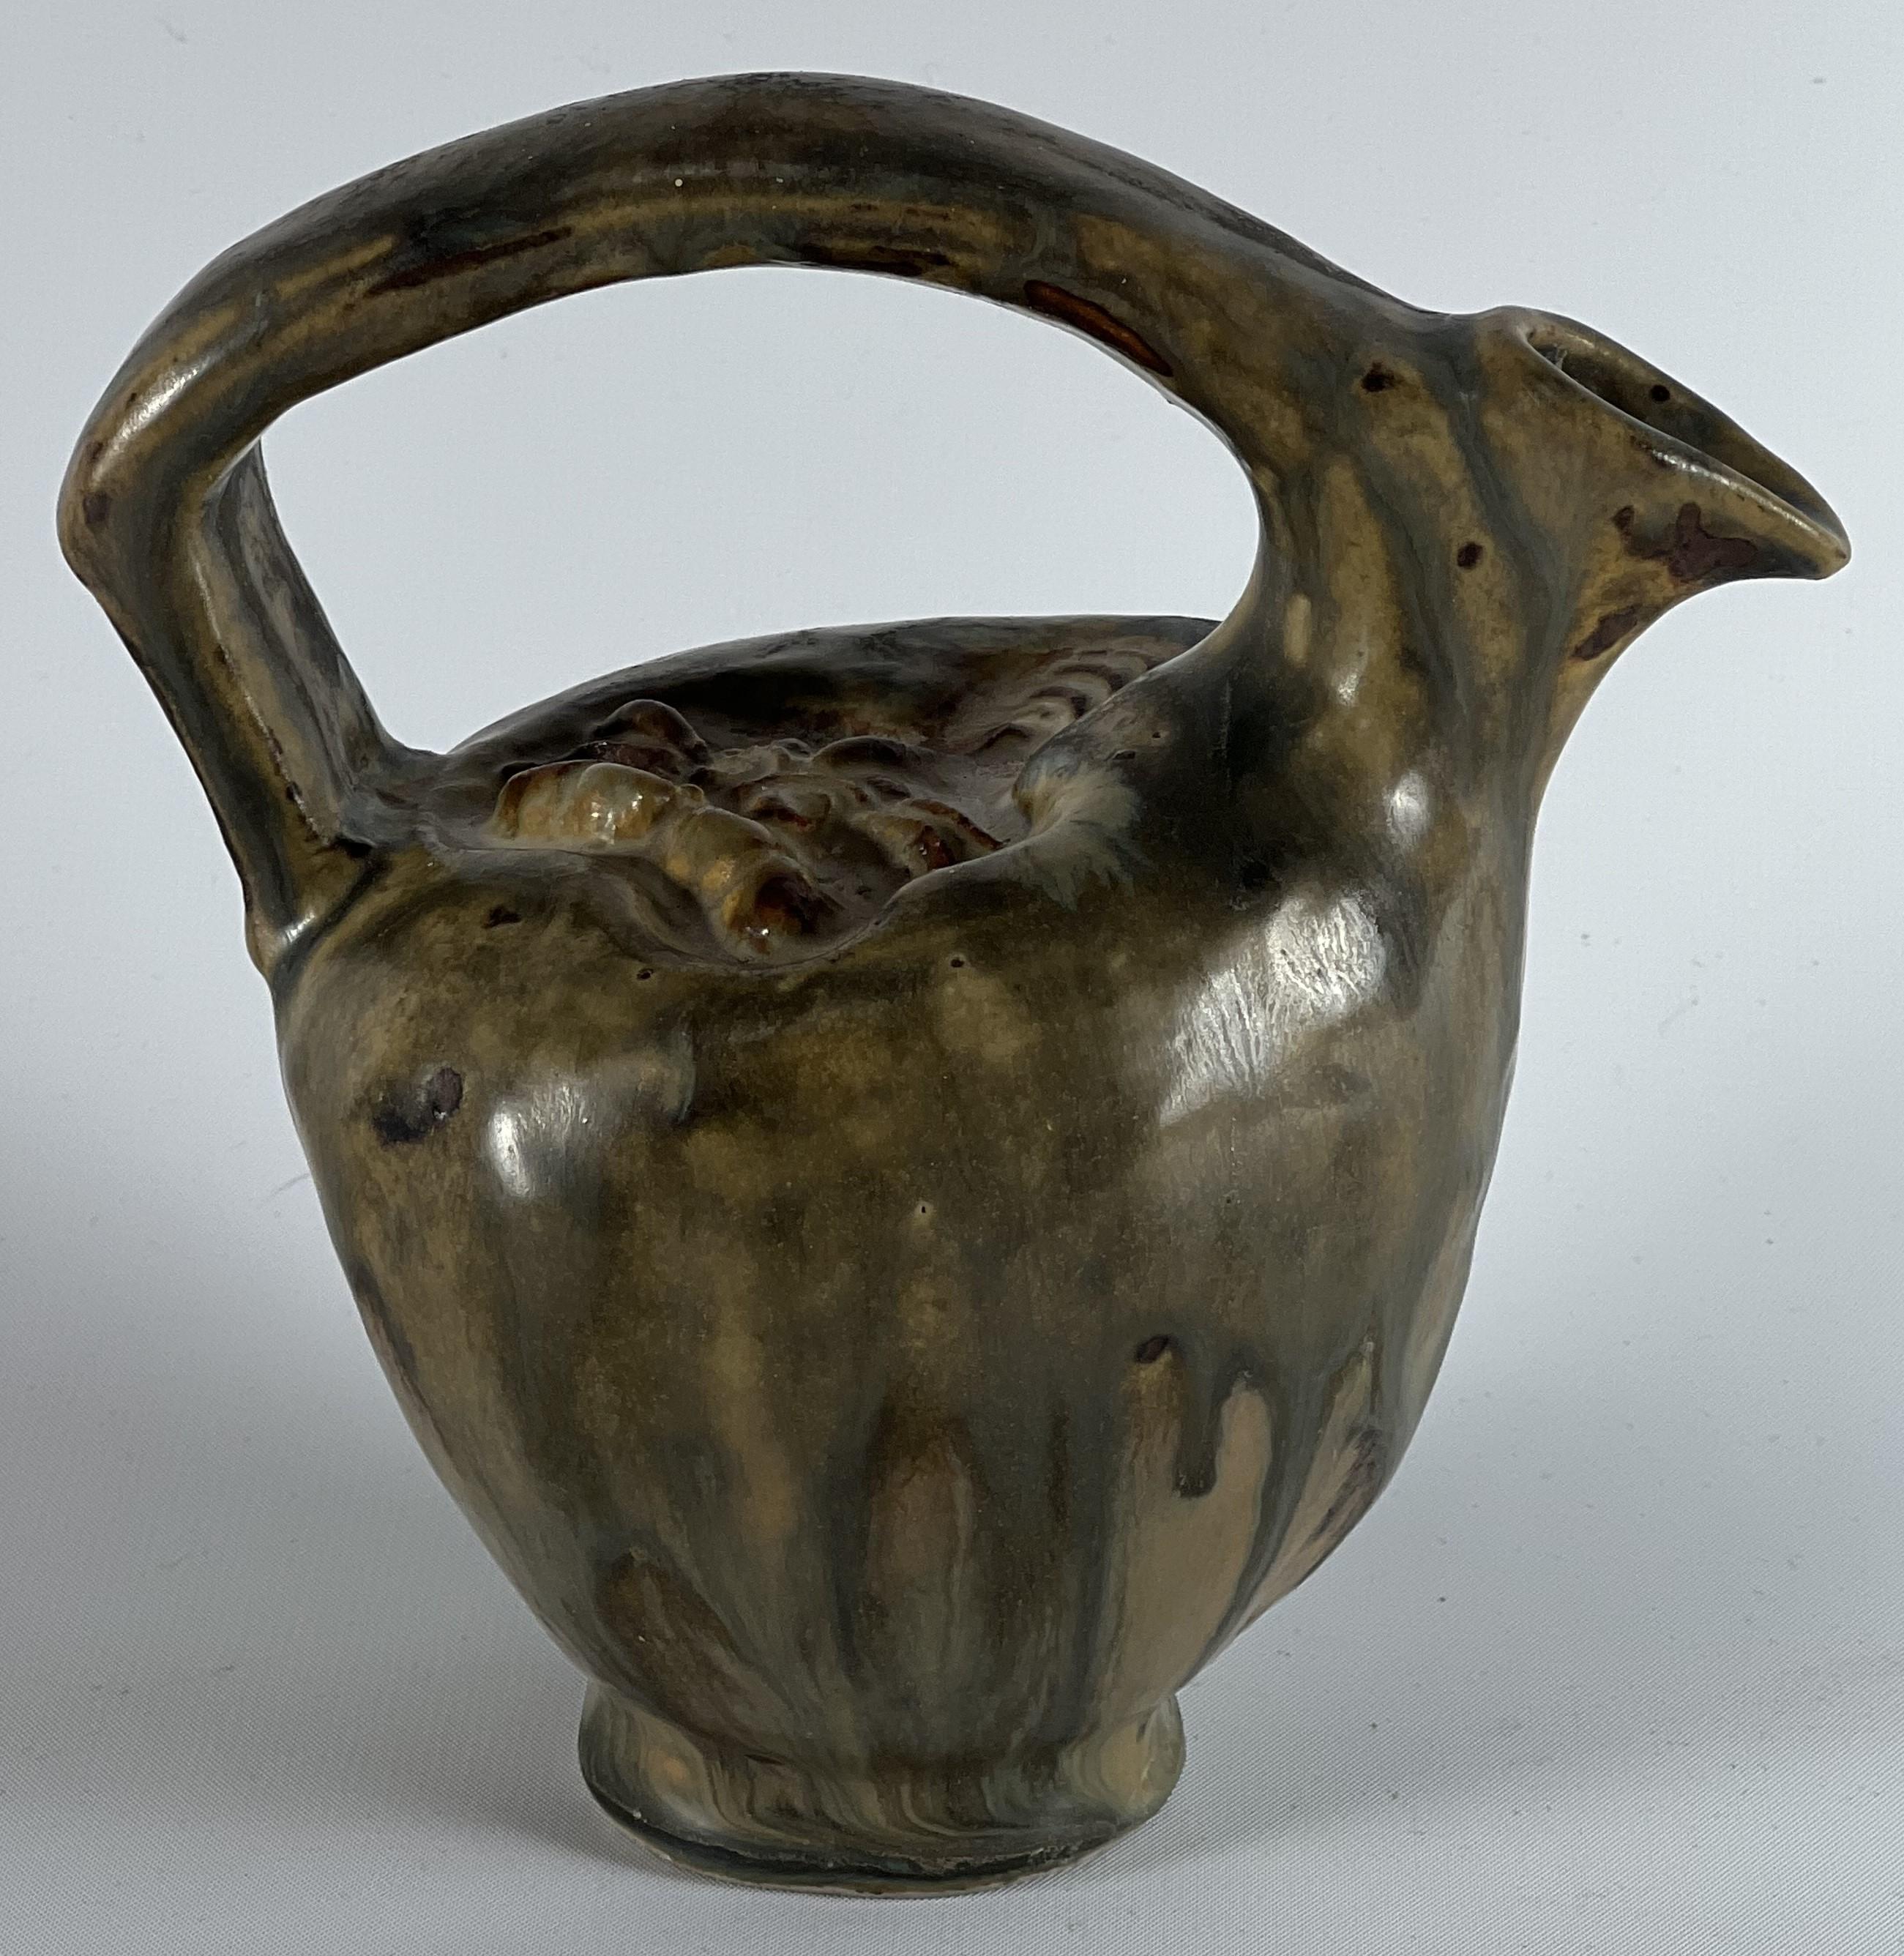 Bode Willumsen operated his own studio in Denmark and his work during the early period was celebrated to such an extent that he was hired at Royal Copenhagen where his related  designs were equally well received and acclaimed world wide.  This jug